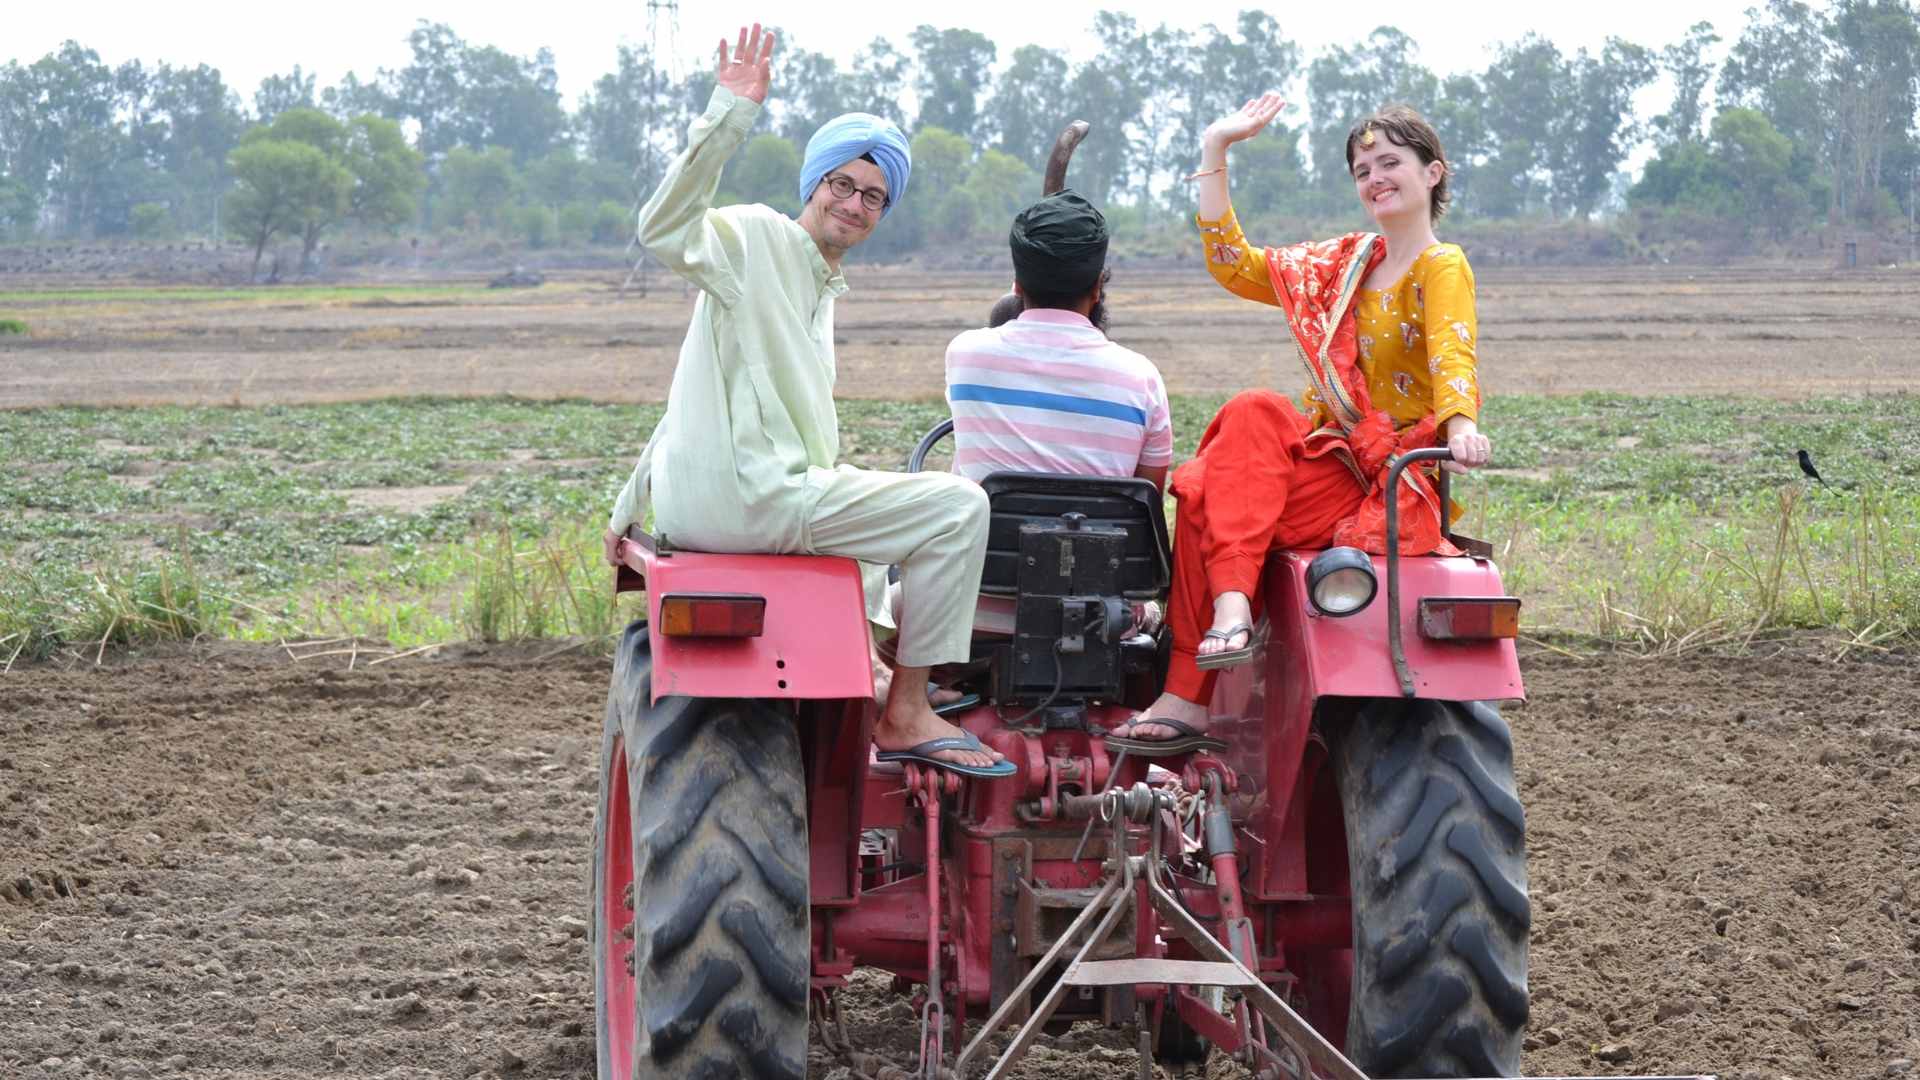 Tractor ride activity during the Amritsar Village Tour